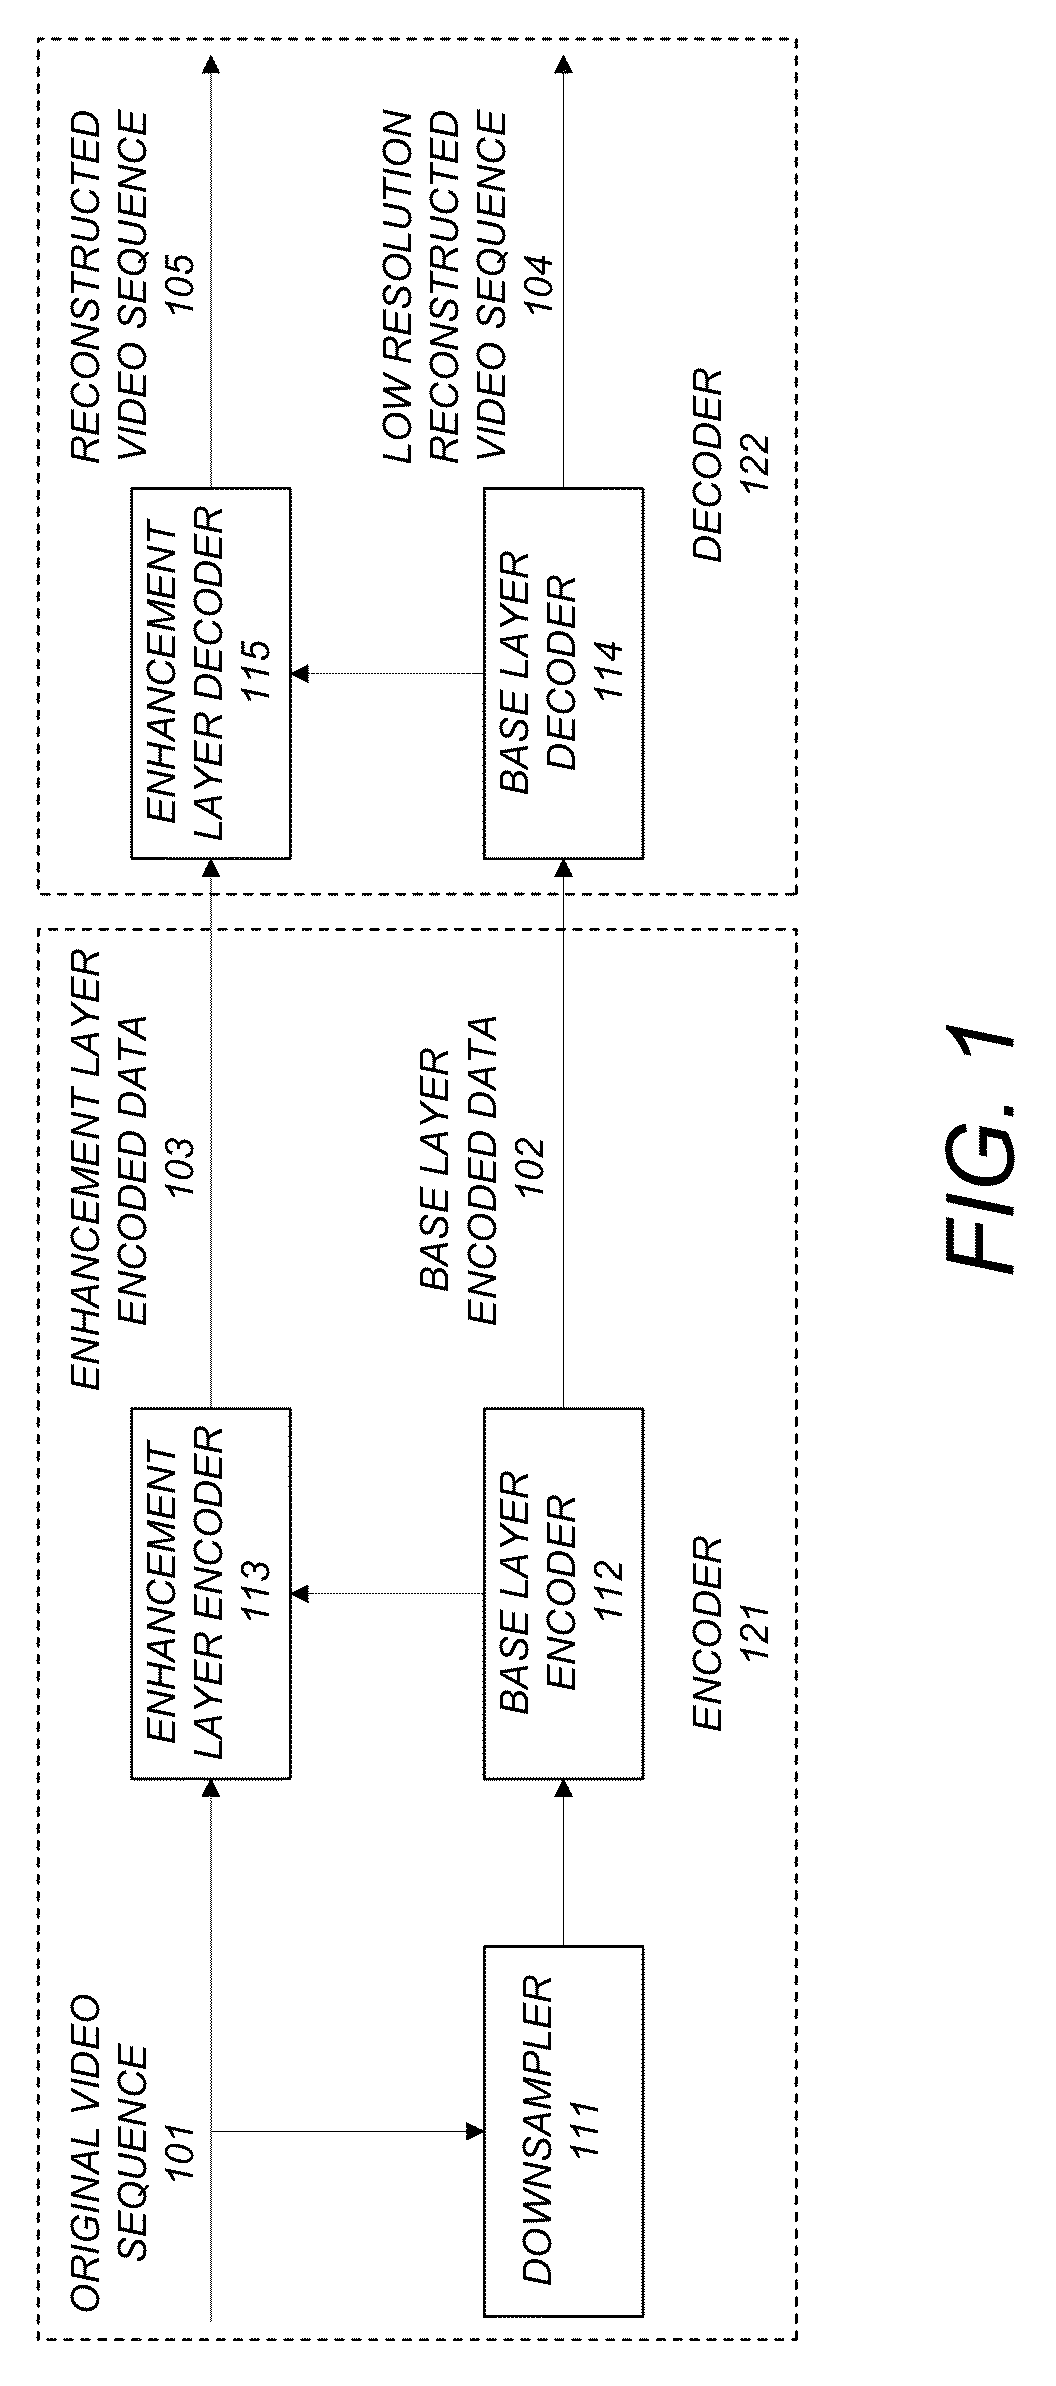 Method and apparatus for spatially scalable video compression and transmission